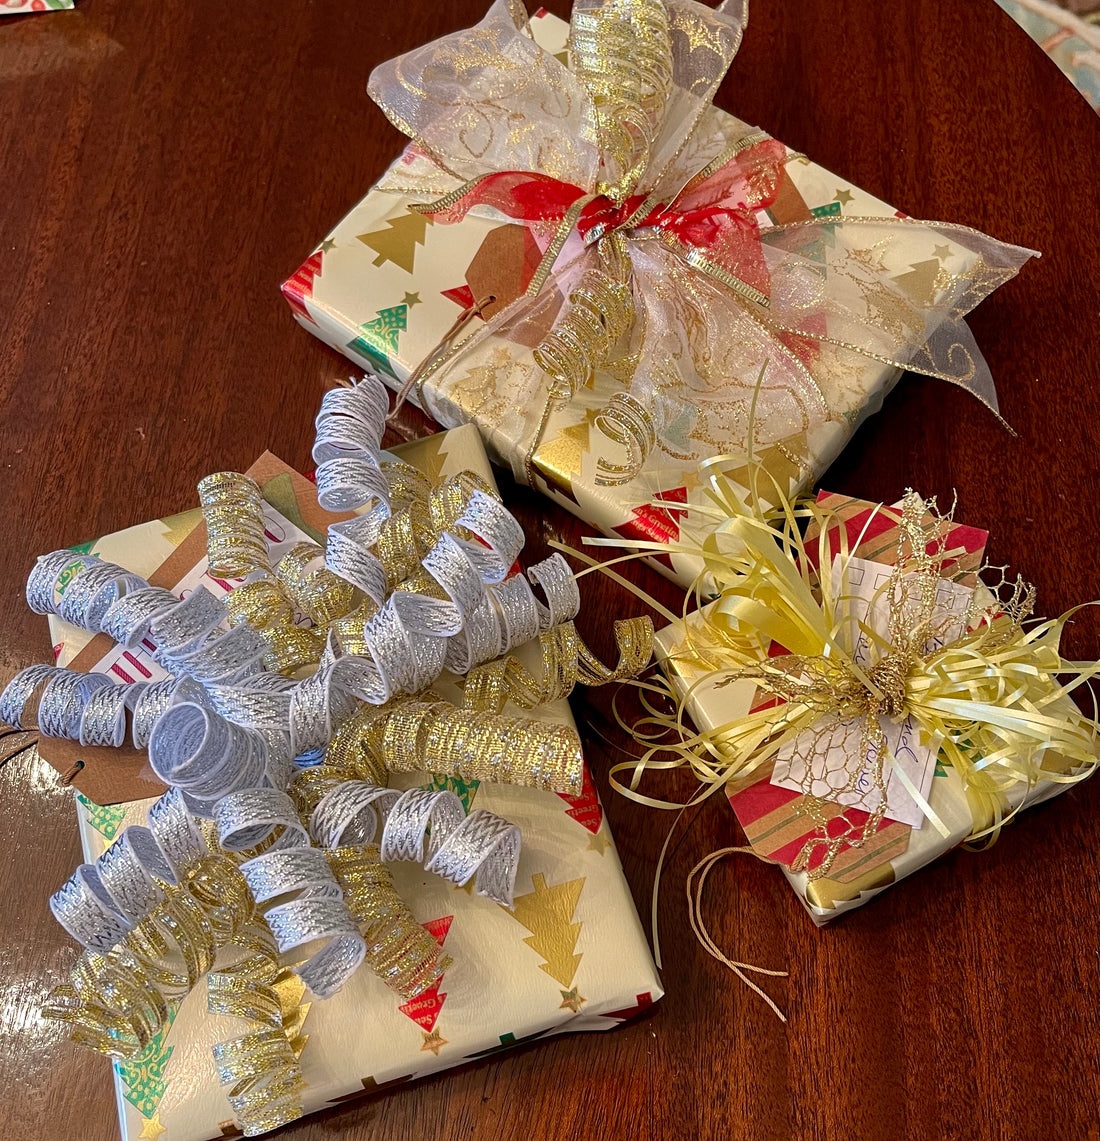 The Art of Intentional Gift Giving: Thoughtful Tips and Ideas